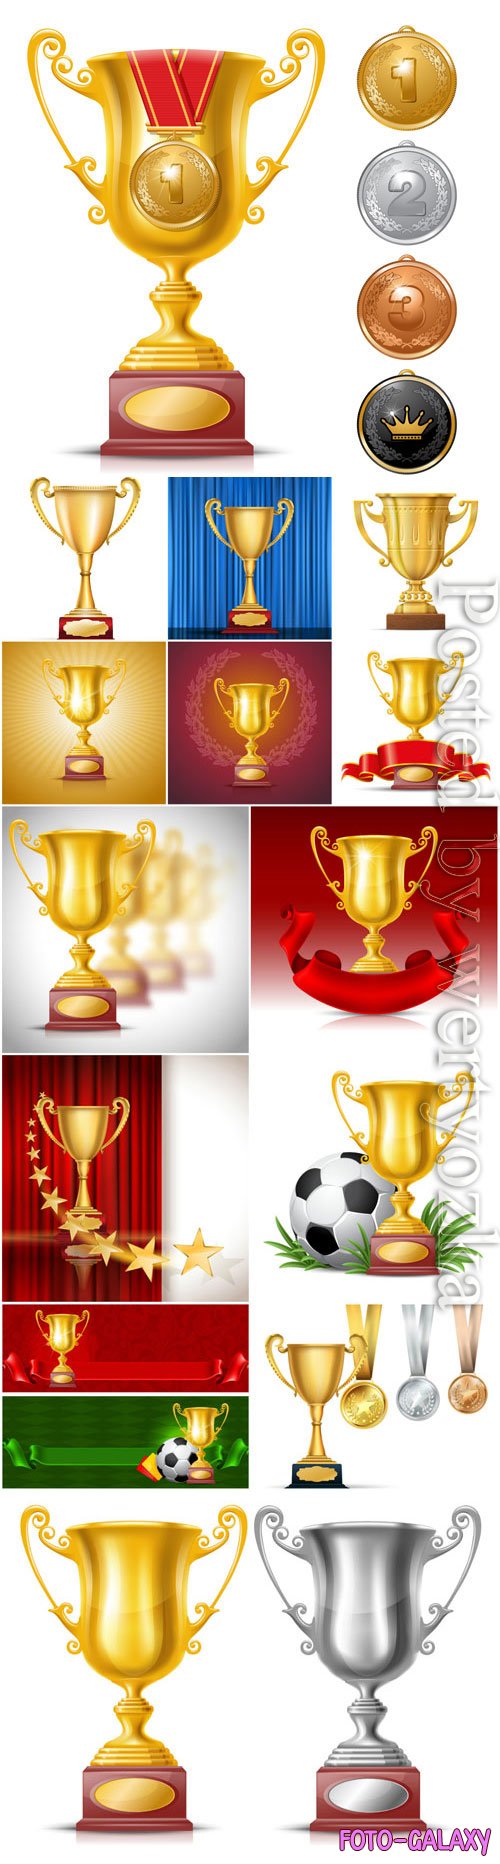 Cups and gold medals in vector